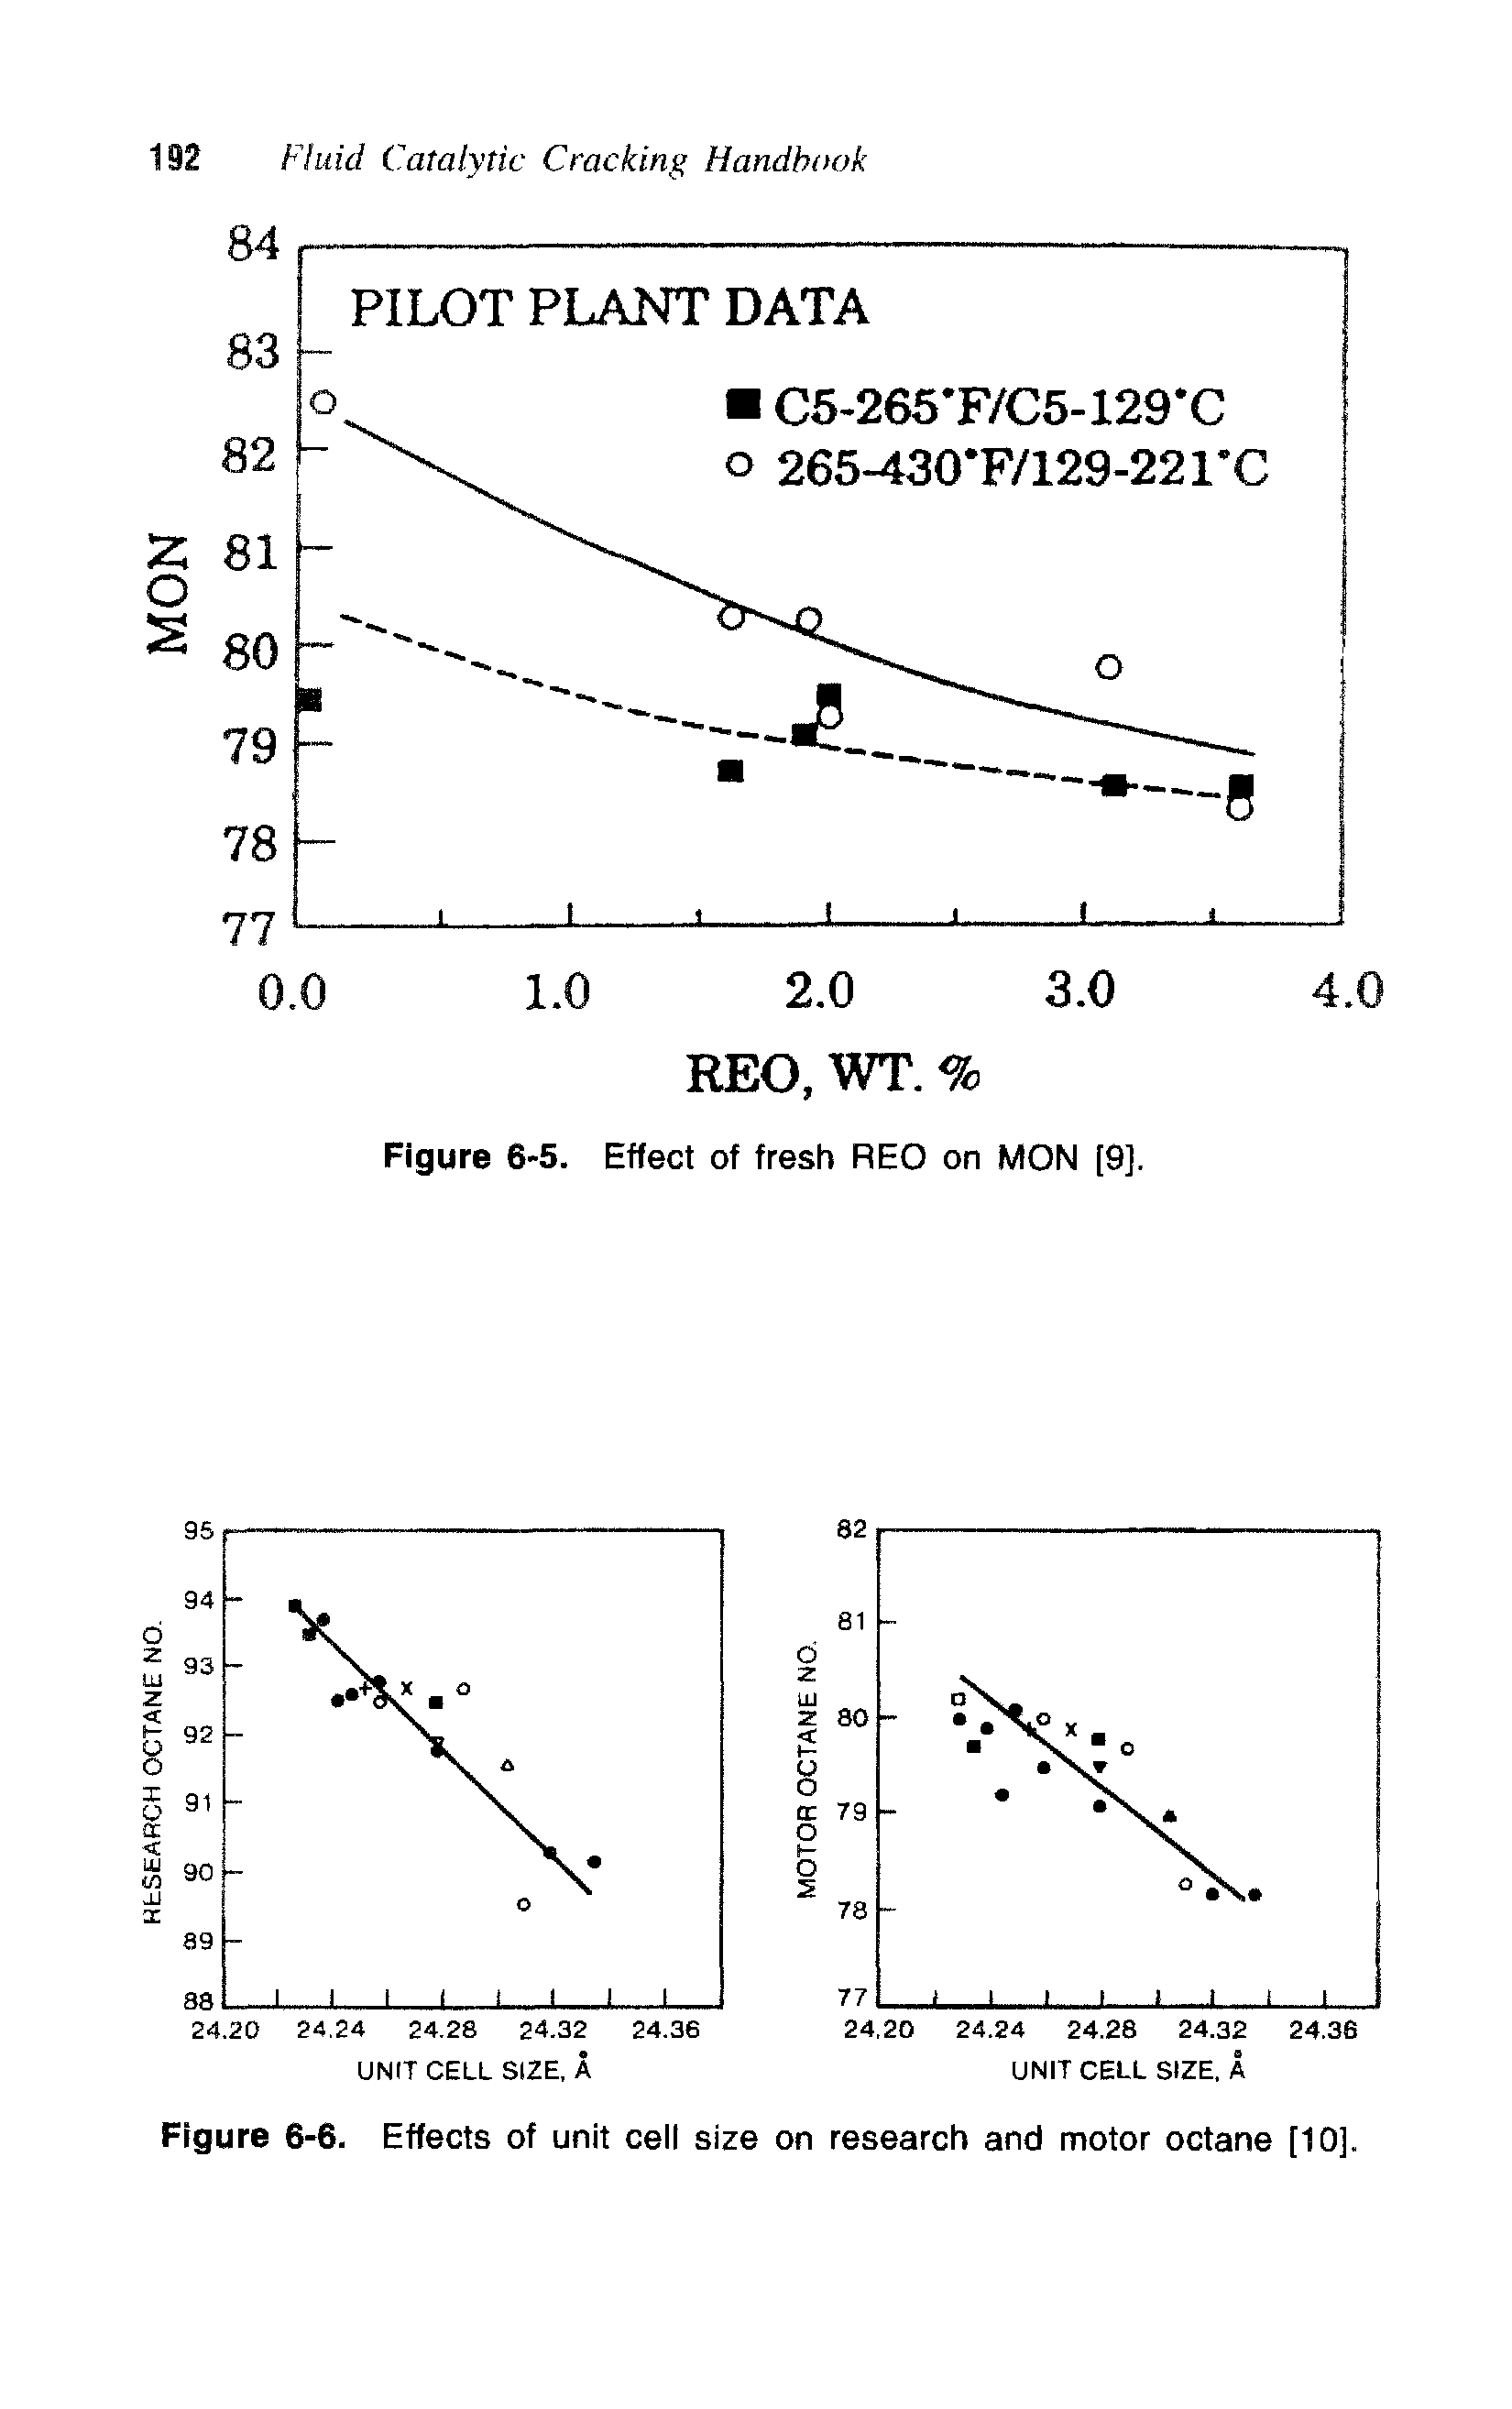 Figure 6-6. Effects of unit cell size on research and motor octane [10].